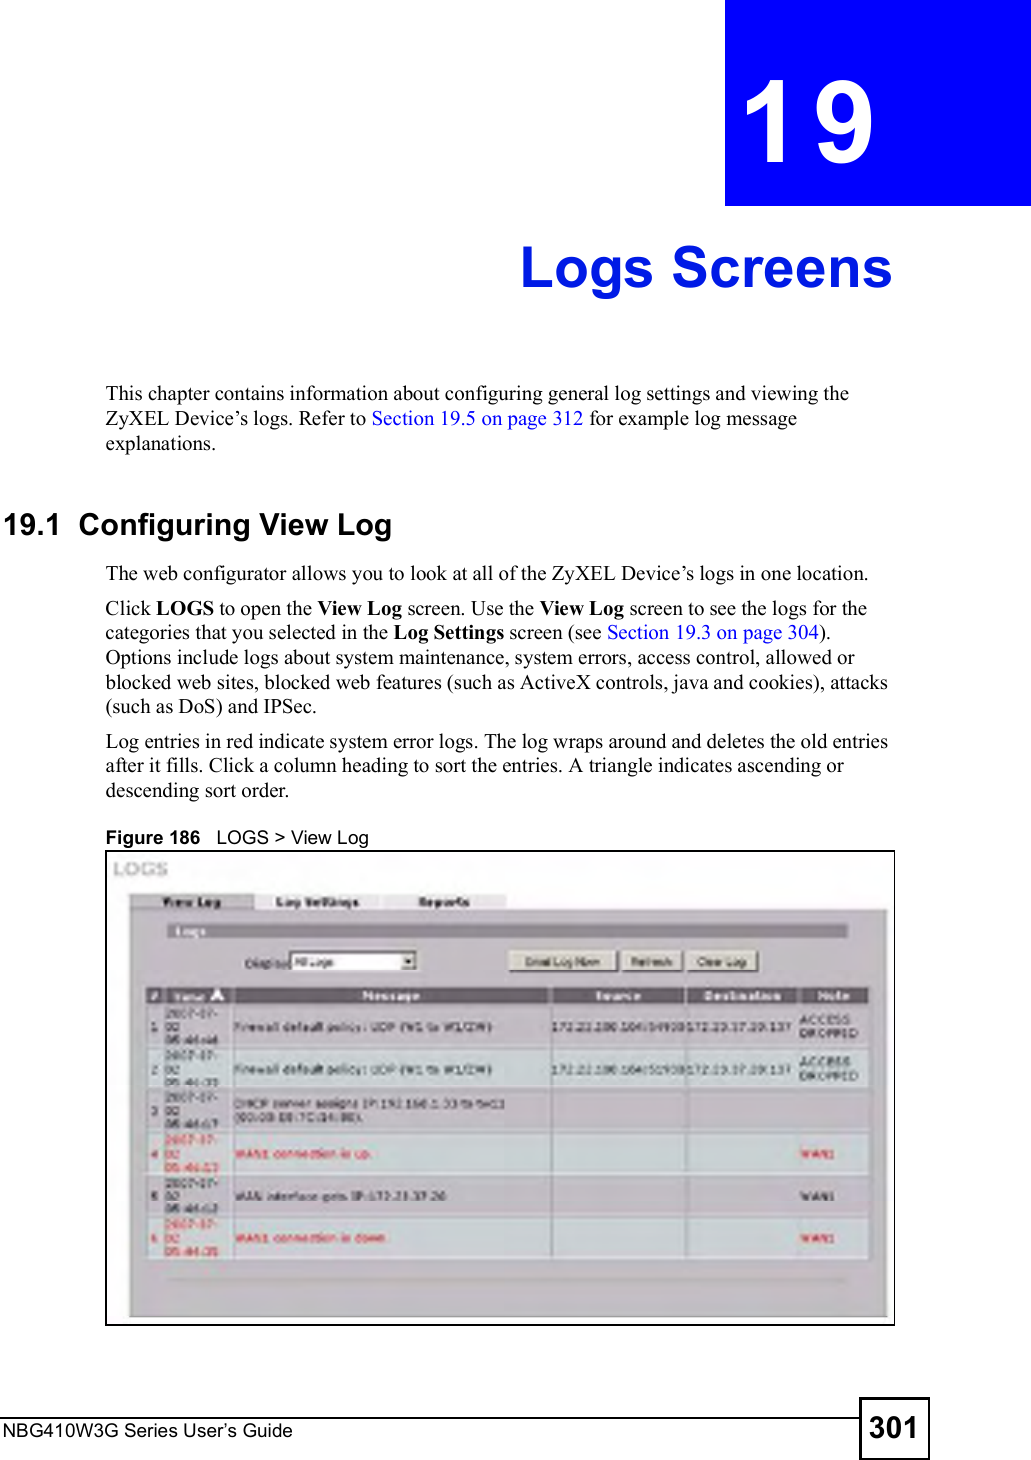 NBG410W3G Series User s Guide 301CHAPTER  19 Logs ScreensThis chapter contains information about configuring general log settings and viewing the ZyXEL Device!s logs. Refer to Section 19.5 on page 312 for example log message explanations.19.1  Configuring View Log The web configurator allows you to look at all of the ZyXEL Device!s logs in one location. Click LOGS to open the View Log screen. Use the View Log screen to see the logs for the categories that you selected in the Log Settings screen (see Section 19.3 on page 304). Options include logs about system maintenance, system errors, access control, allowed or blocked web sites, blocked web features (such as ActiveX controls, java and cookies), attacks (such as DoS) and IPSec.Log entries in red indicate system error logs. The log wraps around and deletes the old entries after it fills. Click a column heading to sort the entries. A triangle indicates ascending or descending sort order. Figure 186   LOGS &gt; View Log    